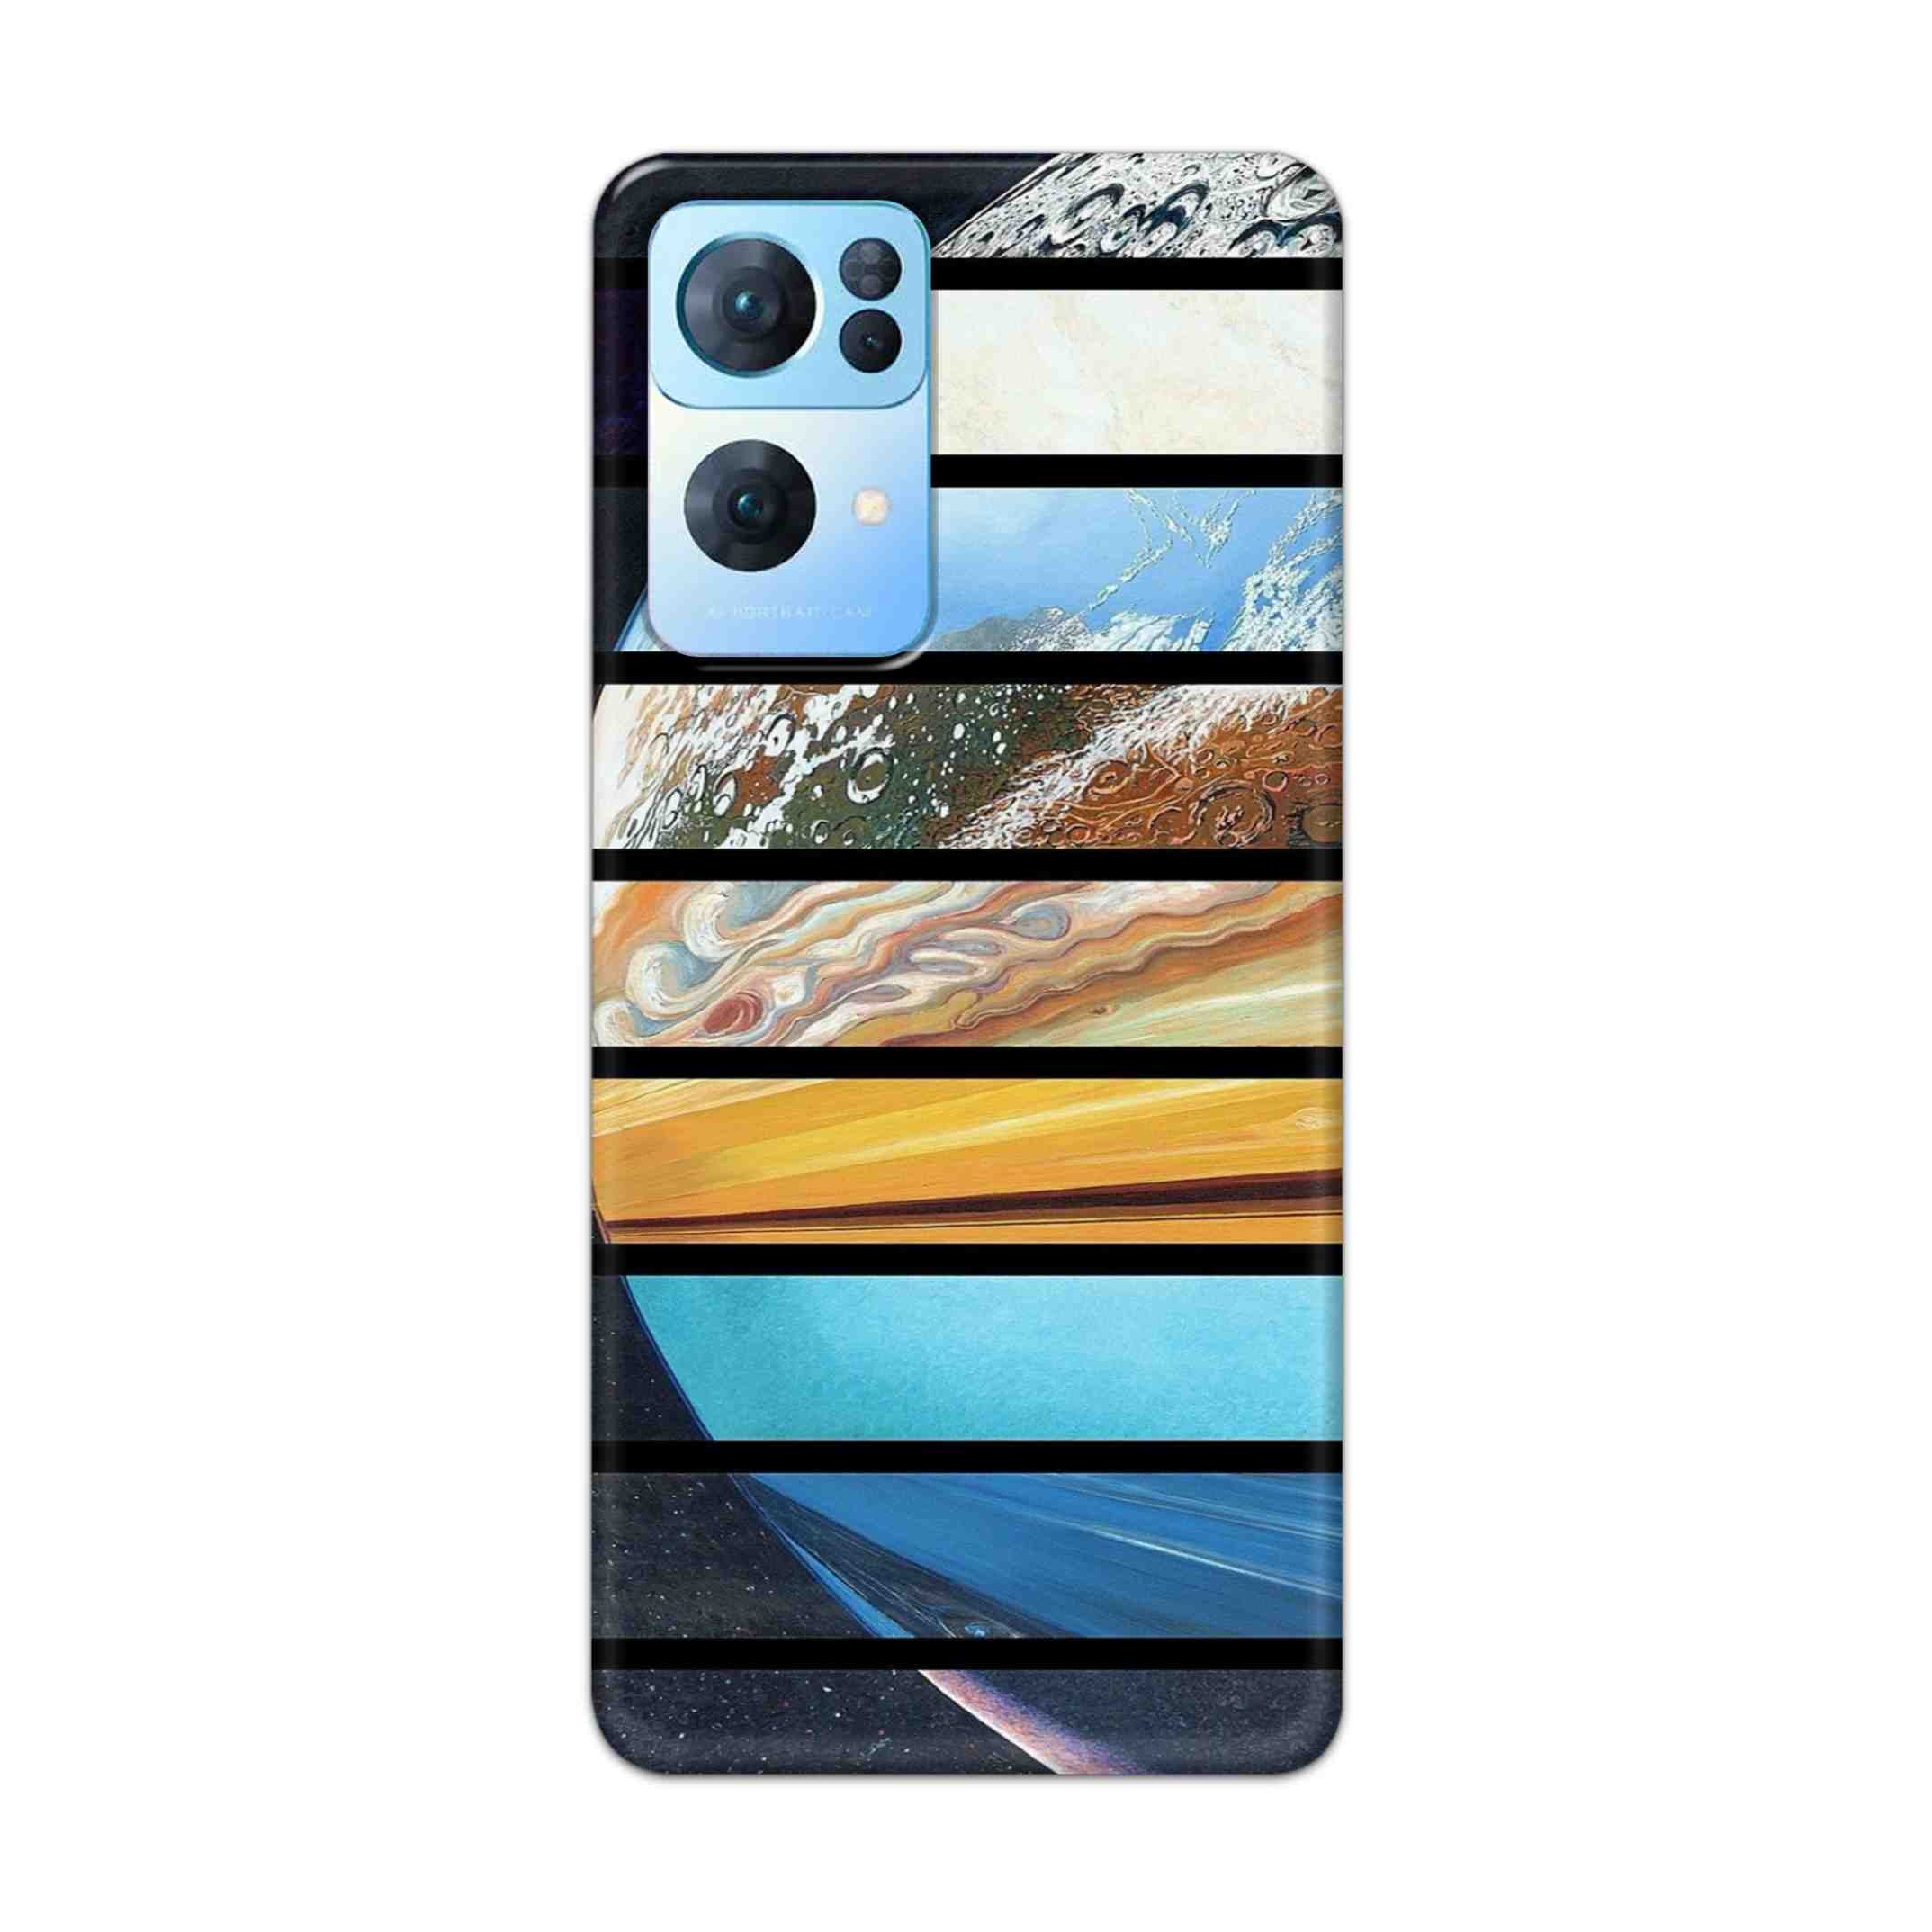 Buy Colourful Earth Hard Back Mobile Phone Case Cover For Oppo Reno 7 Pro Online